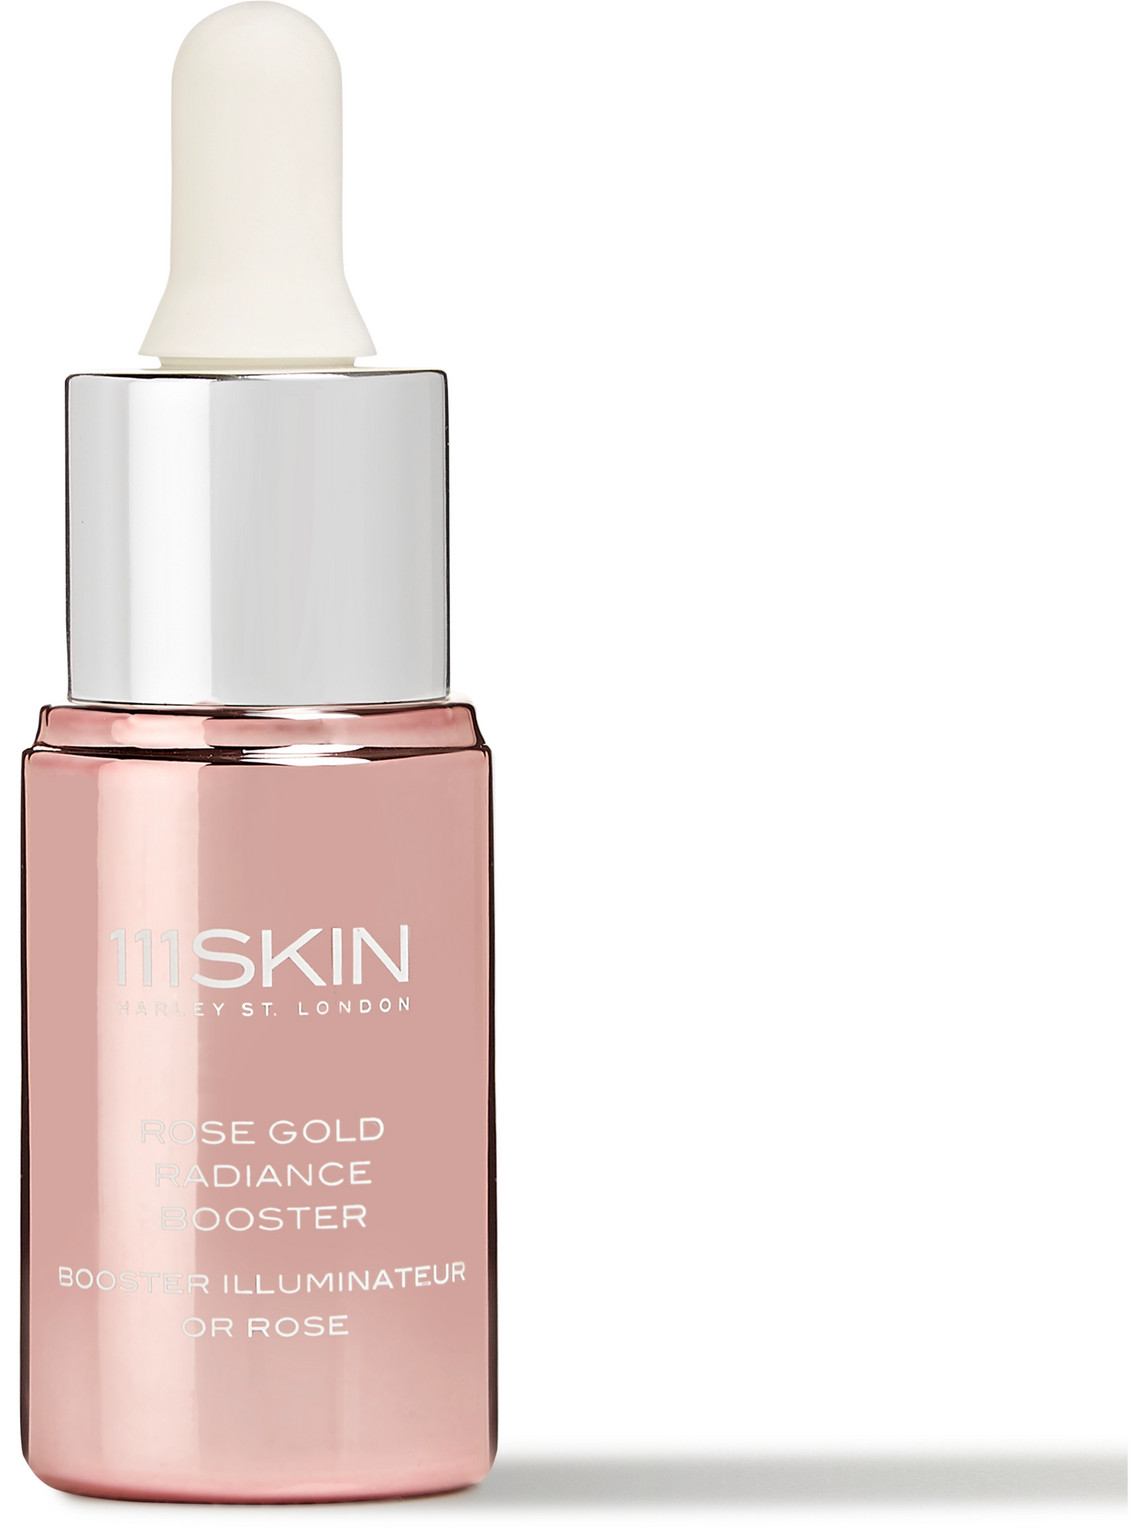 111skin Rose Gold Radiance Booster In Colorless